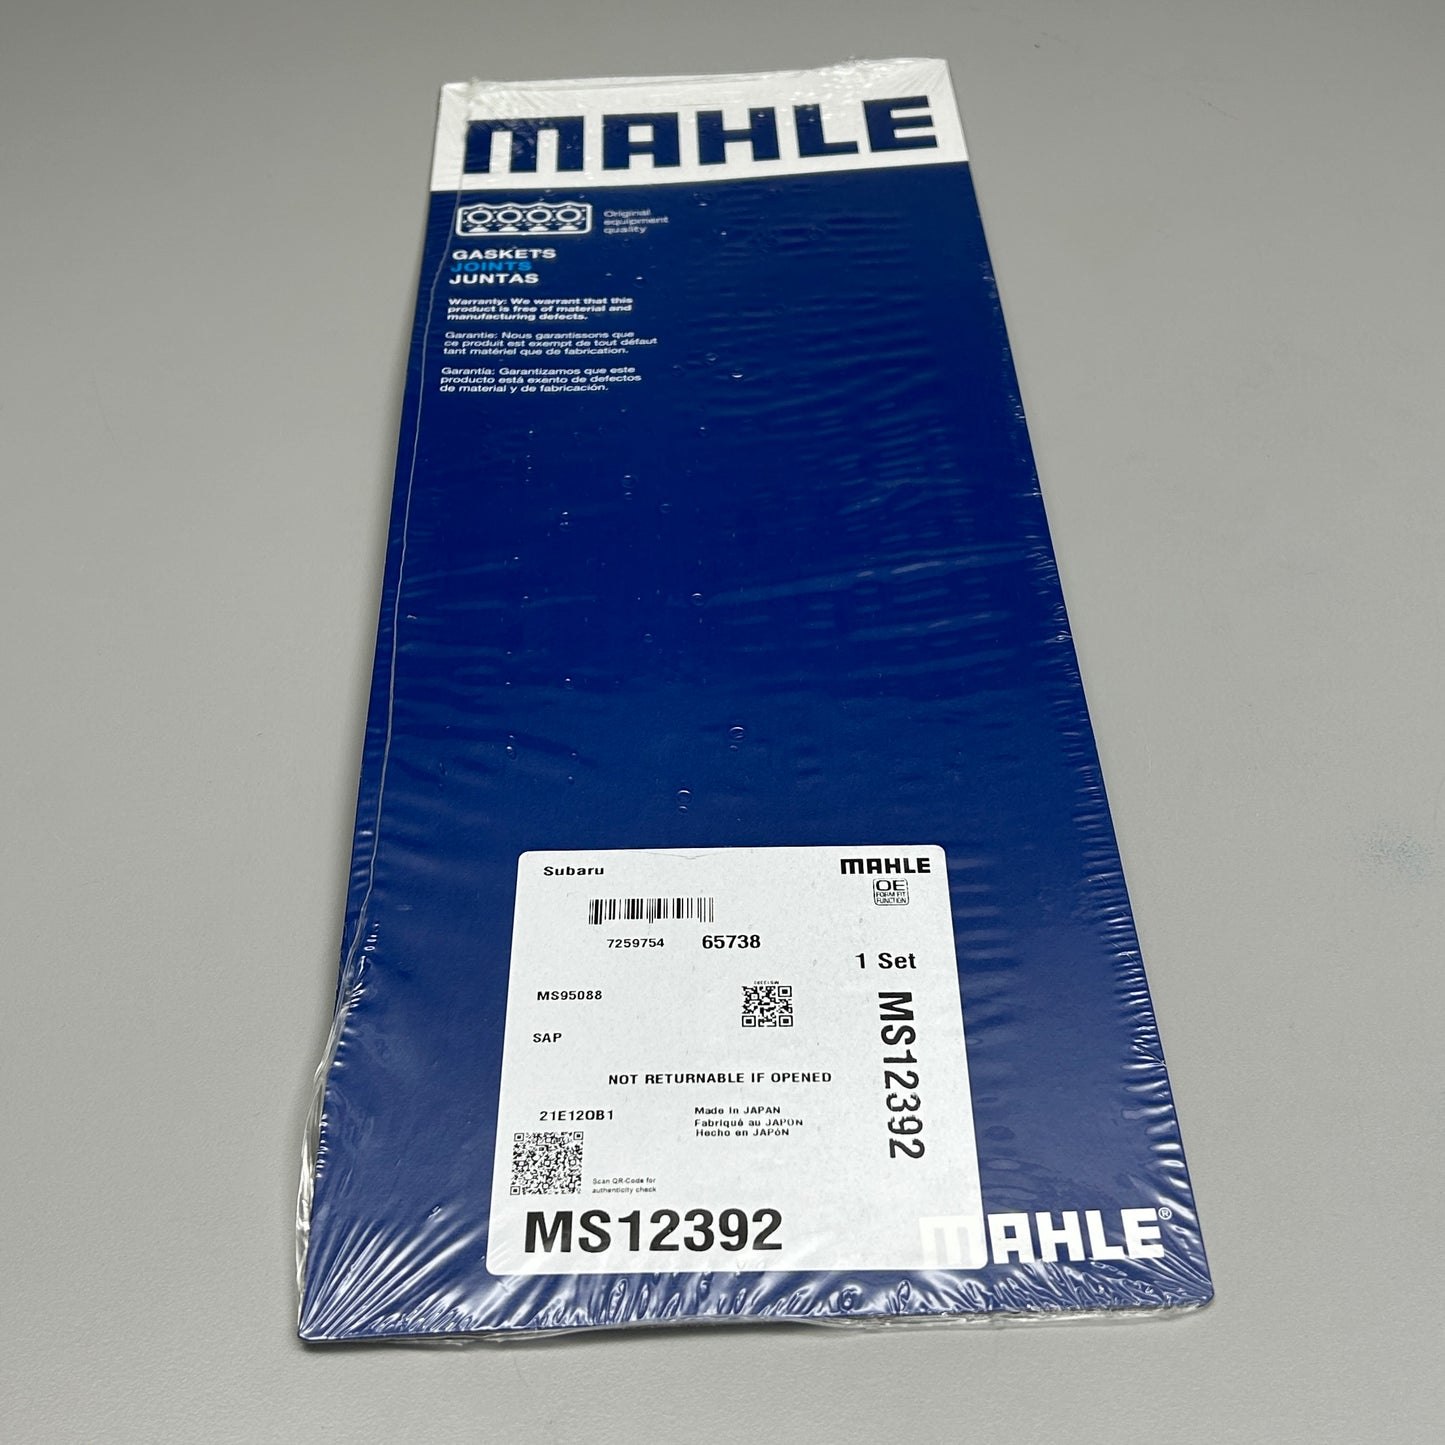 MAHLE Exhaust Manifold Gasket Set for Subaru MS12392 (New)